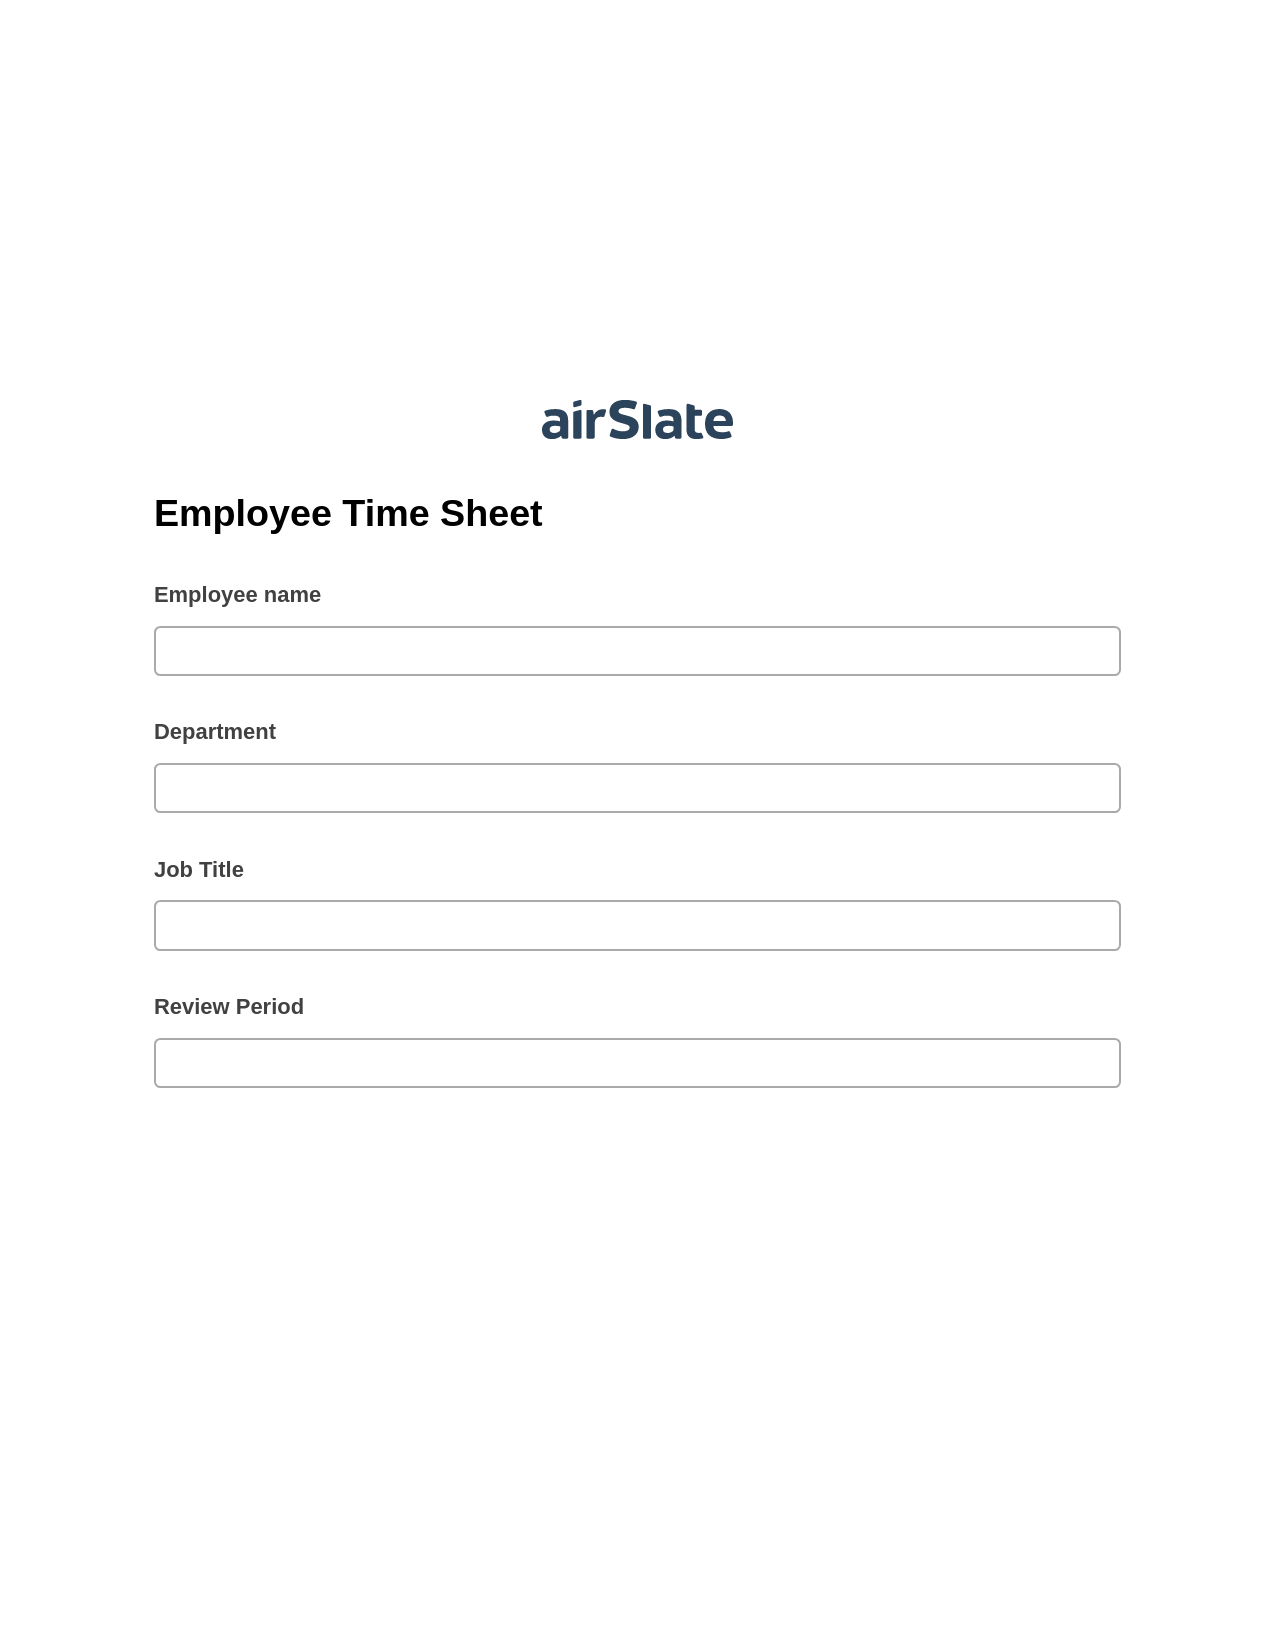 Employee Time Sheet Pre-fill Dropdowns from Airtable, Create MS Dynamics 365 Records Bot, Archive to SharePoint Folder Bot